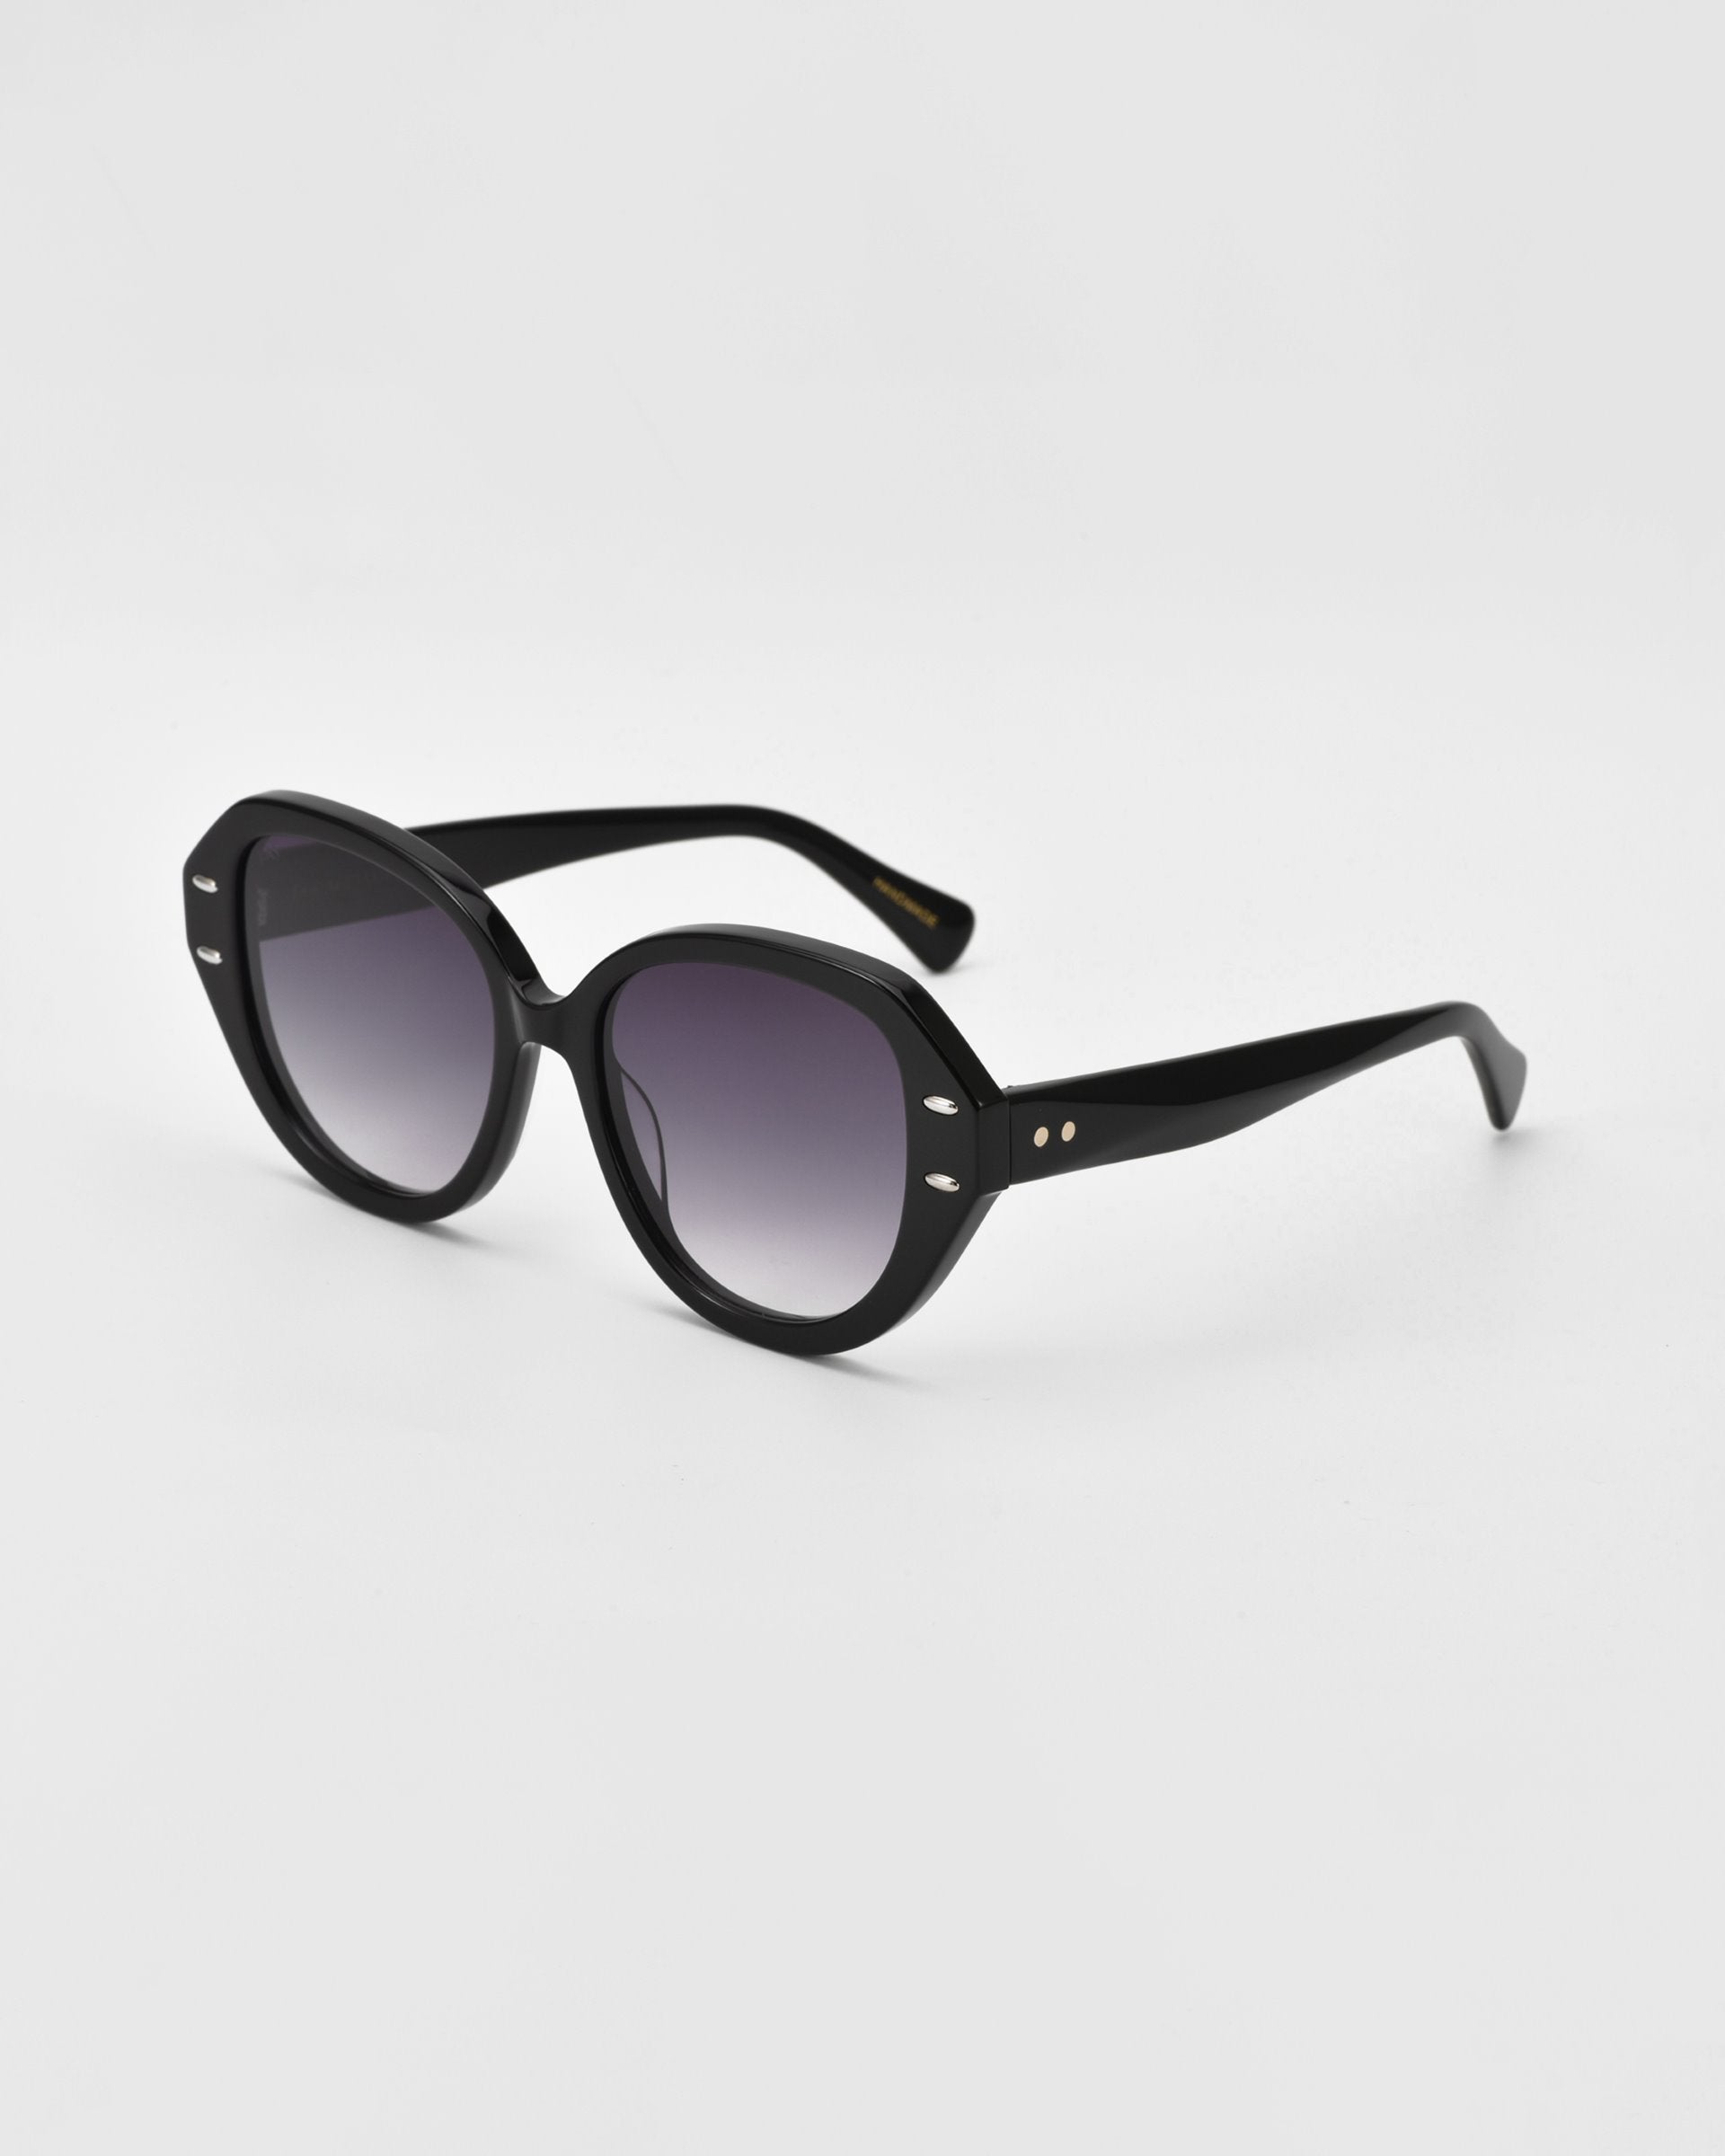 A pair of black round sunglasses with dark tinted lenses. The frame, crafted from plant-based acetate, has a glossy finish with small metallic accents near the hinges on the arms. The background is plain white.

Mirage by For Art&#39;s Sake®